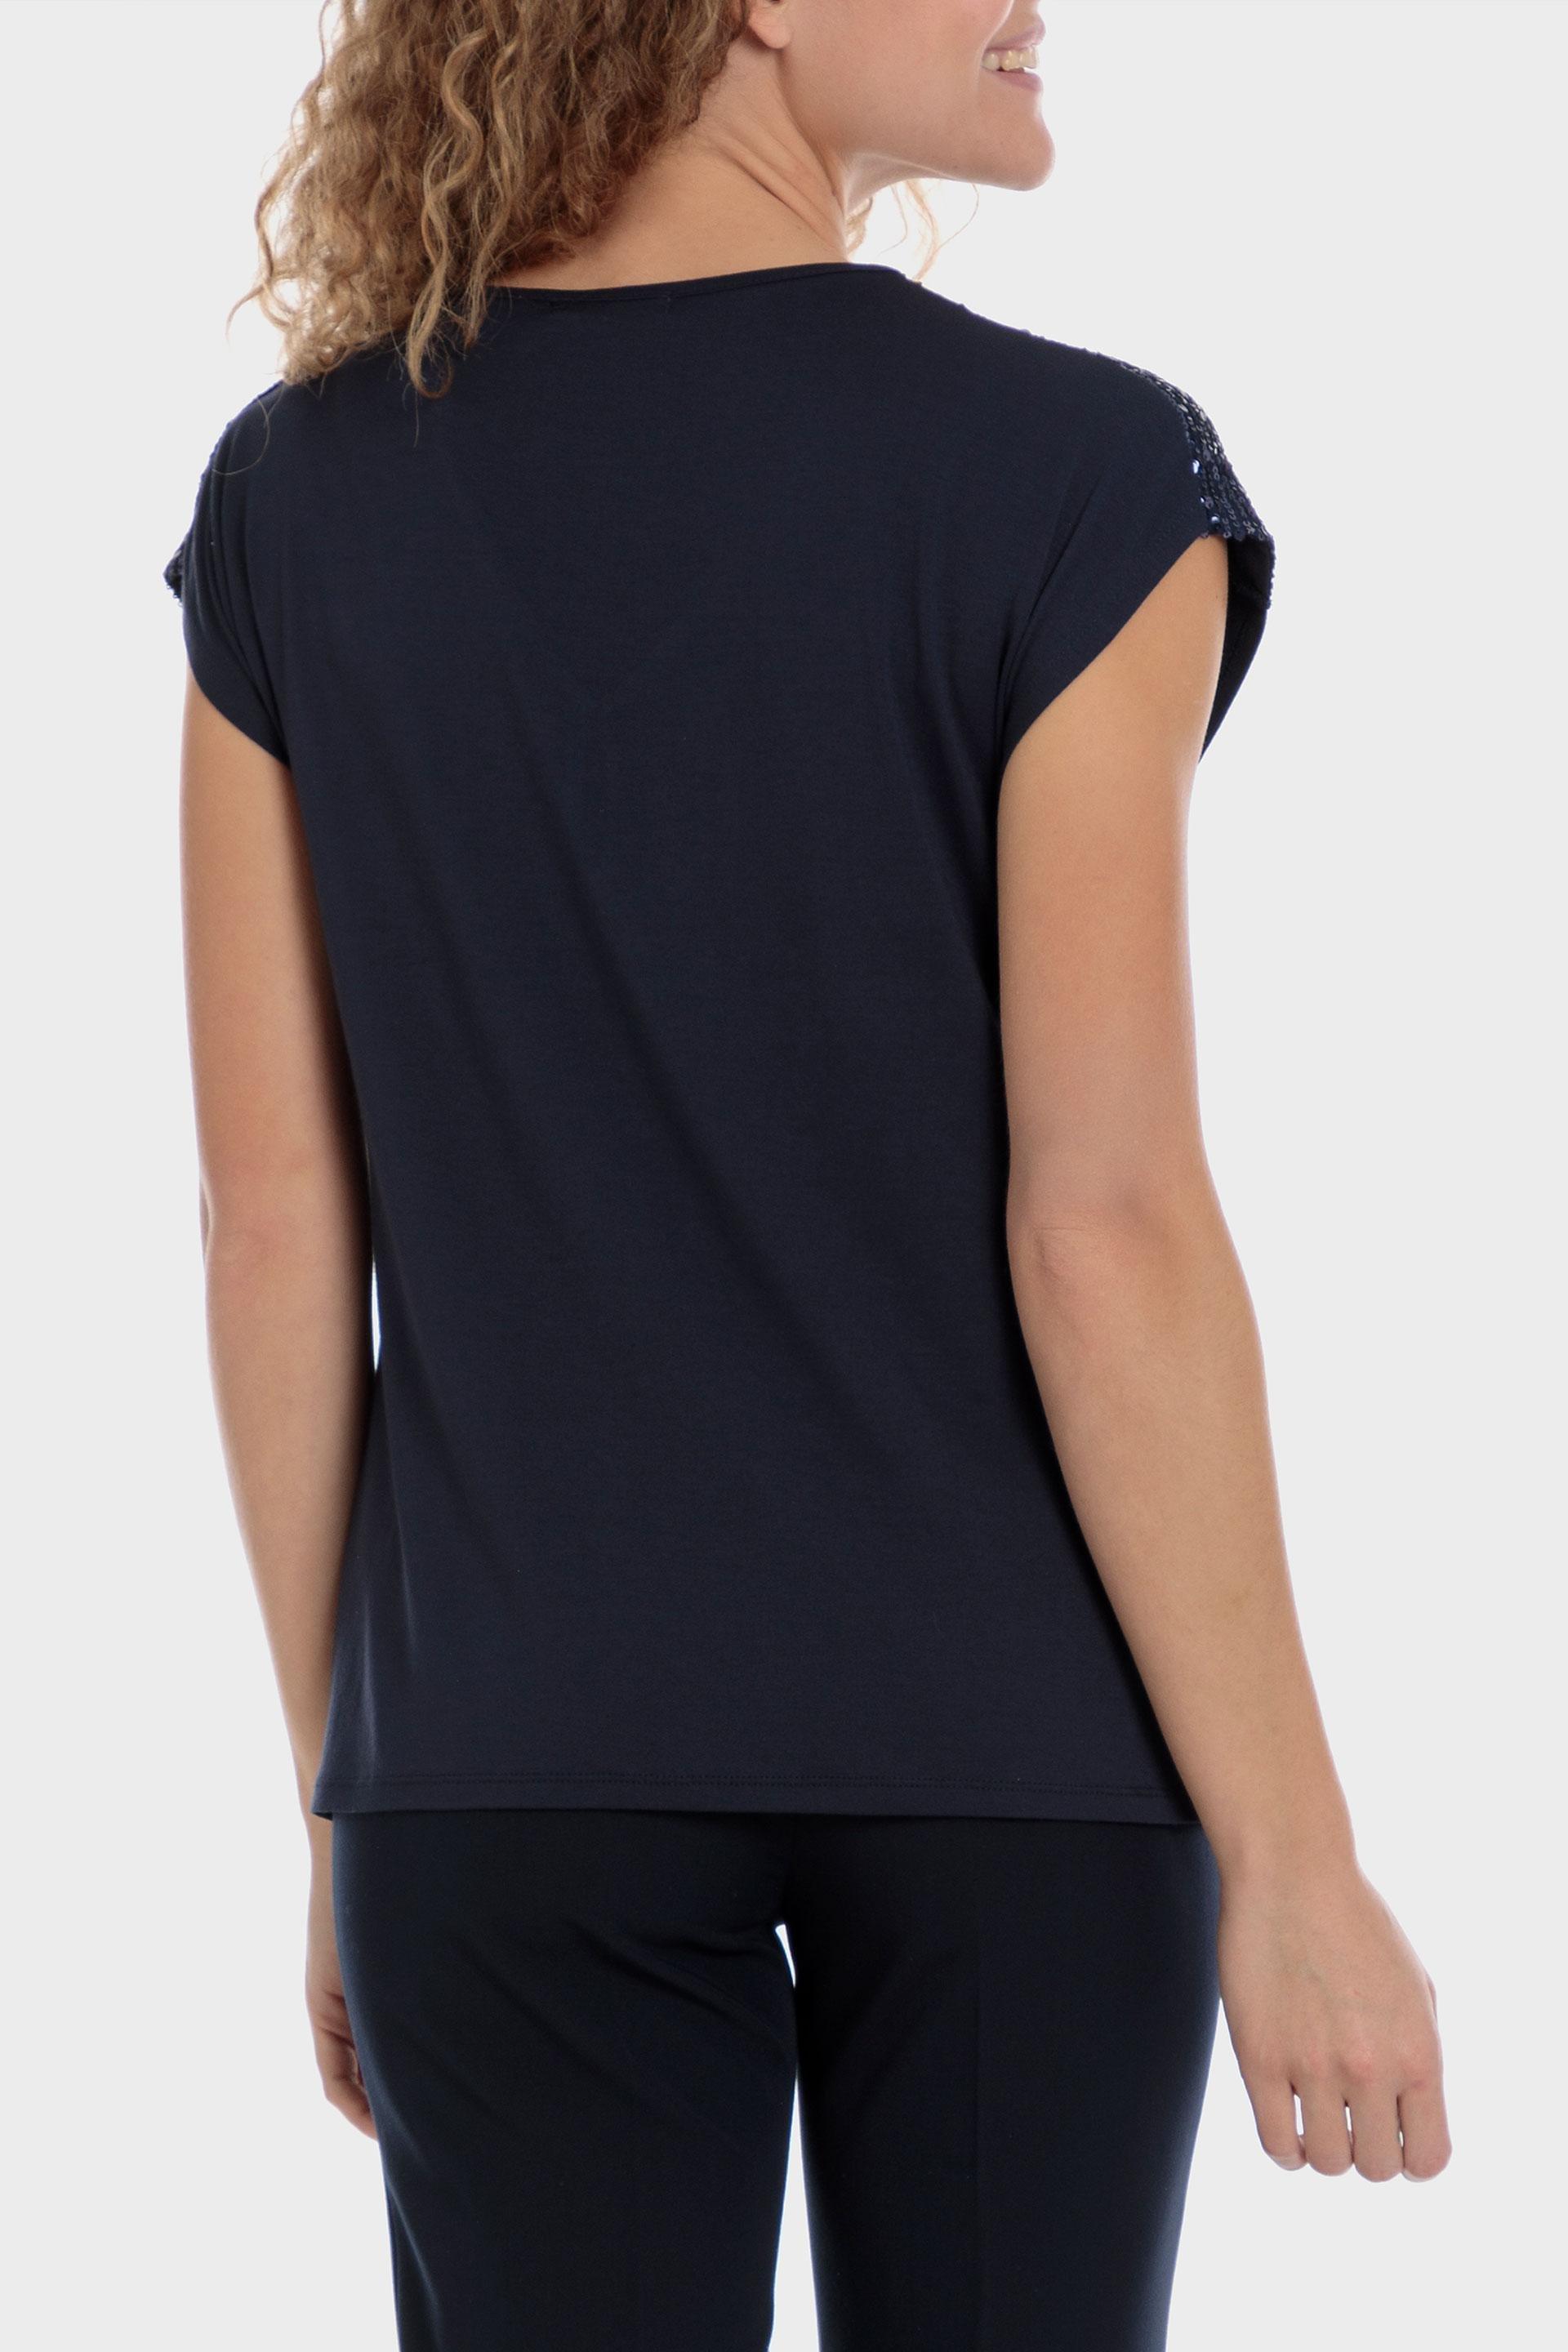 Punt Roma - Navy Sequins T-Shirt